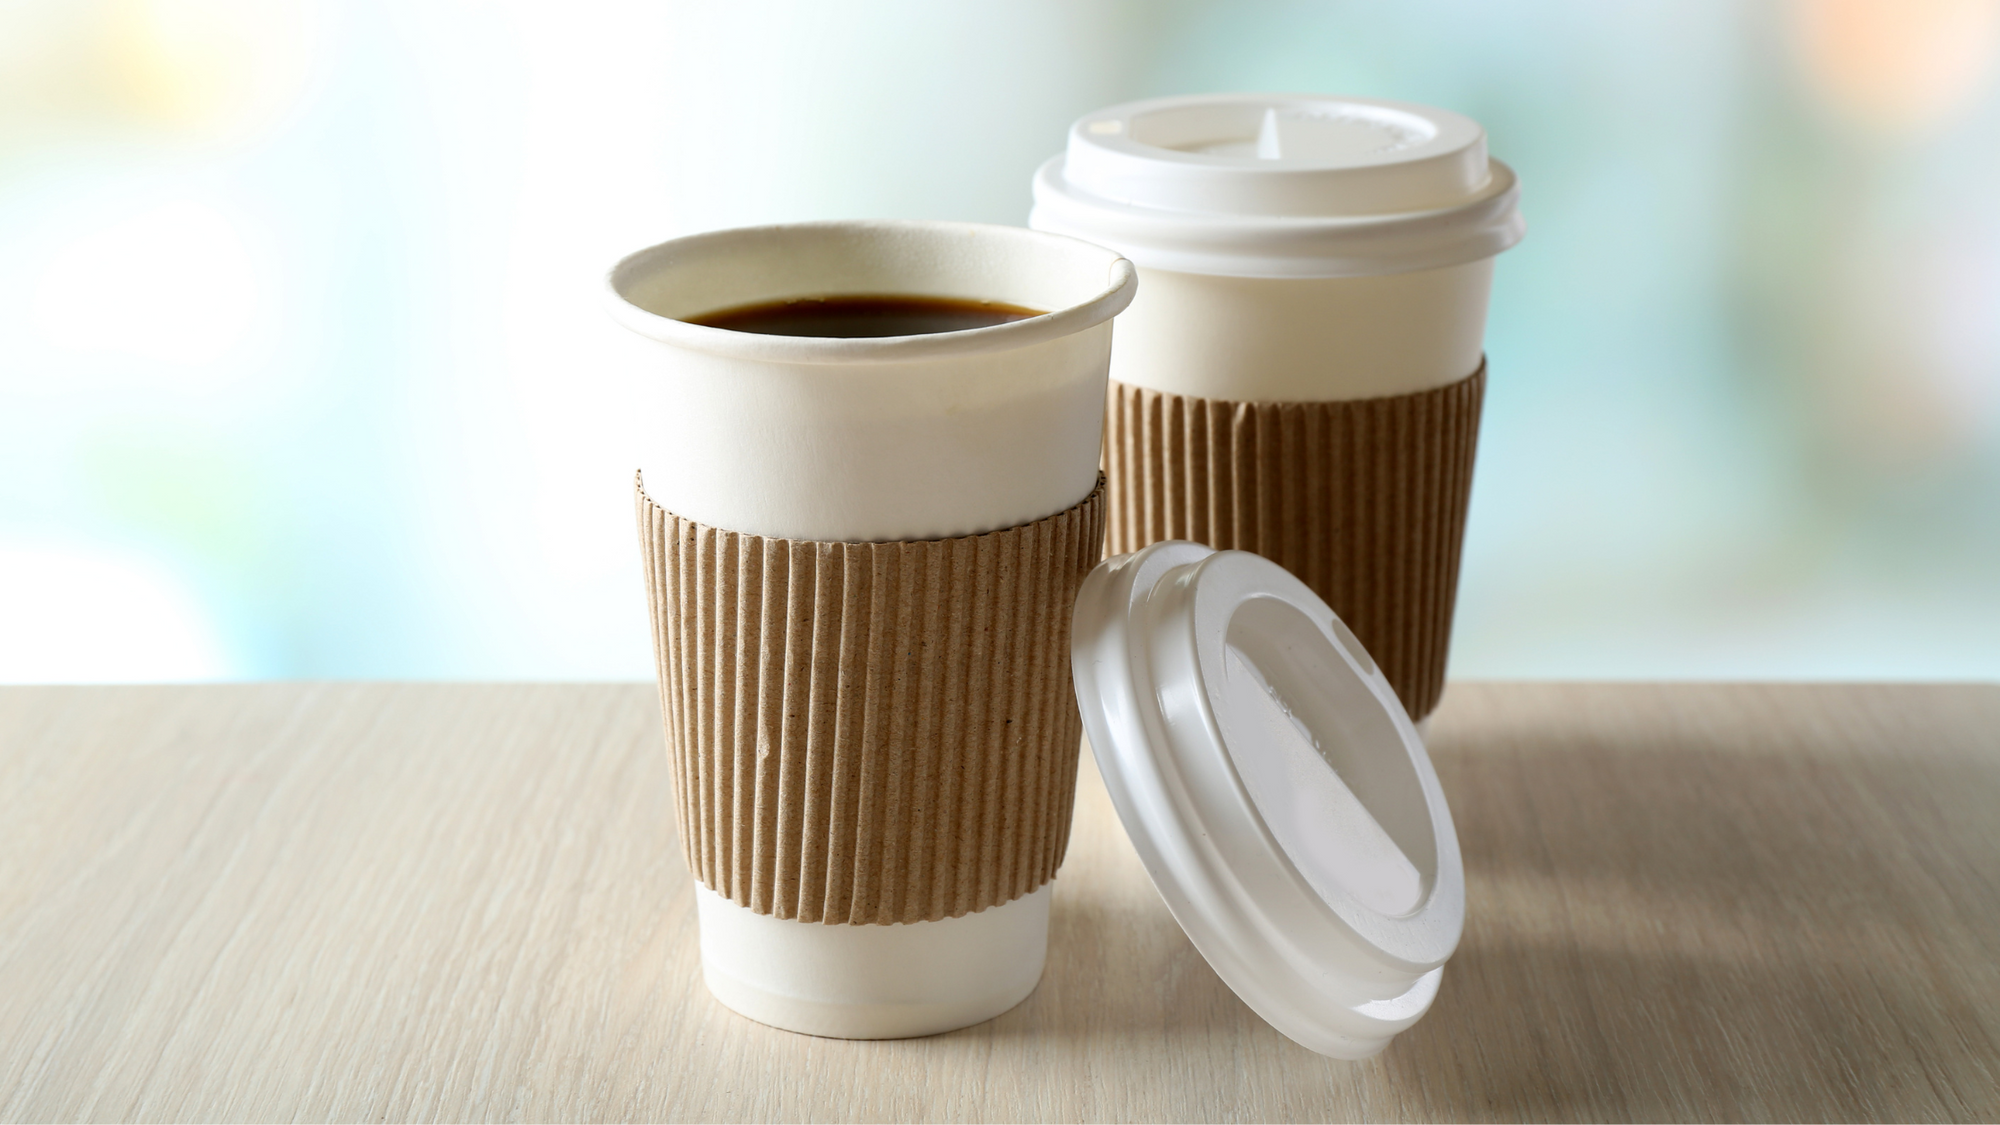 A Sustainable Sip: The Journey of Eco-Friendly Disposable Coffee Cups